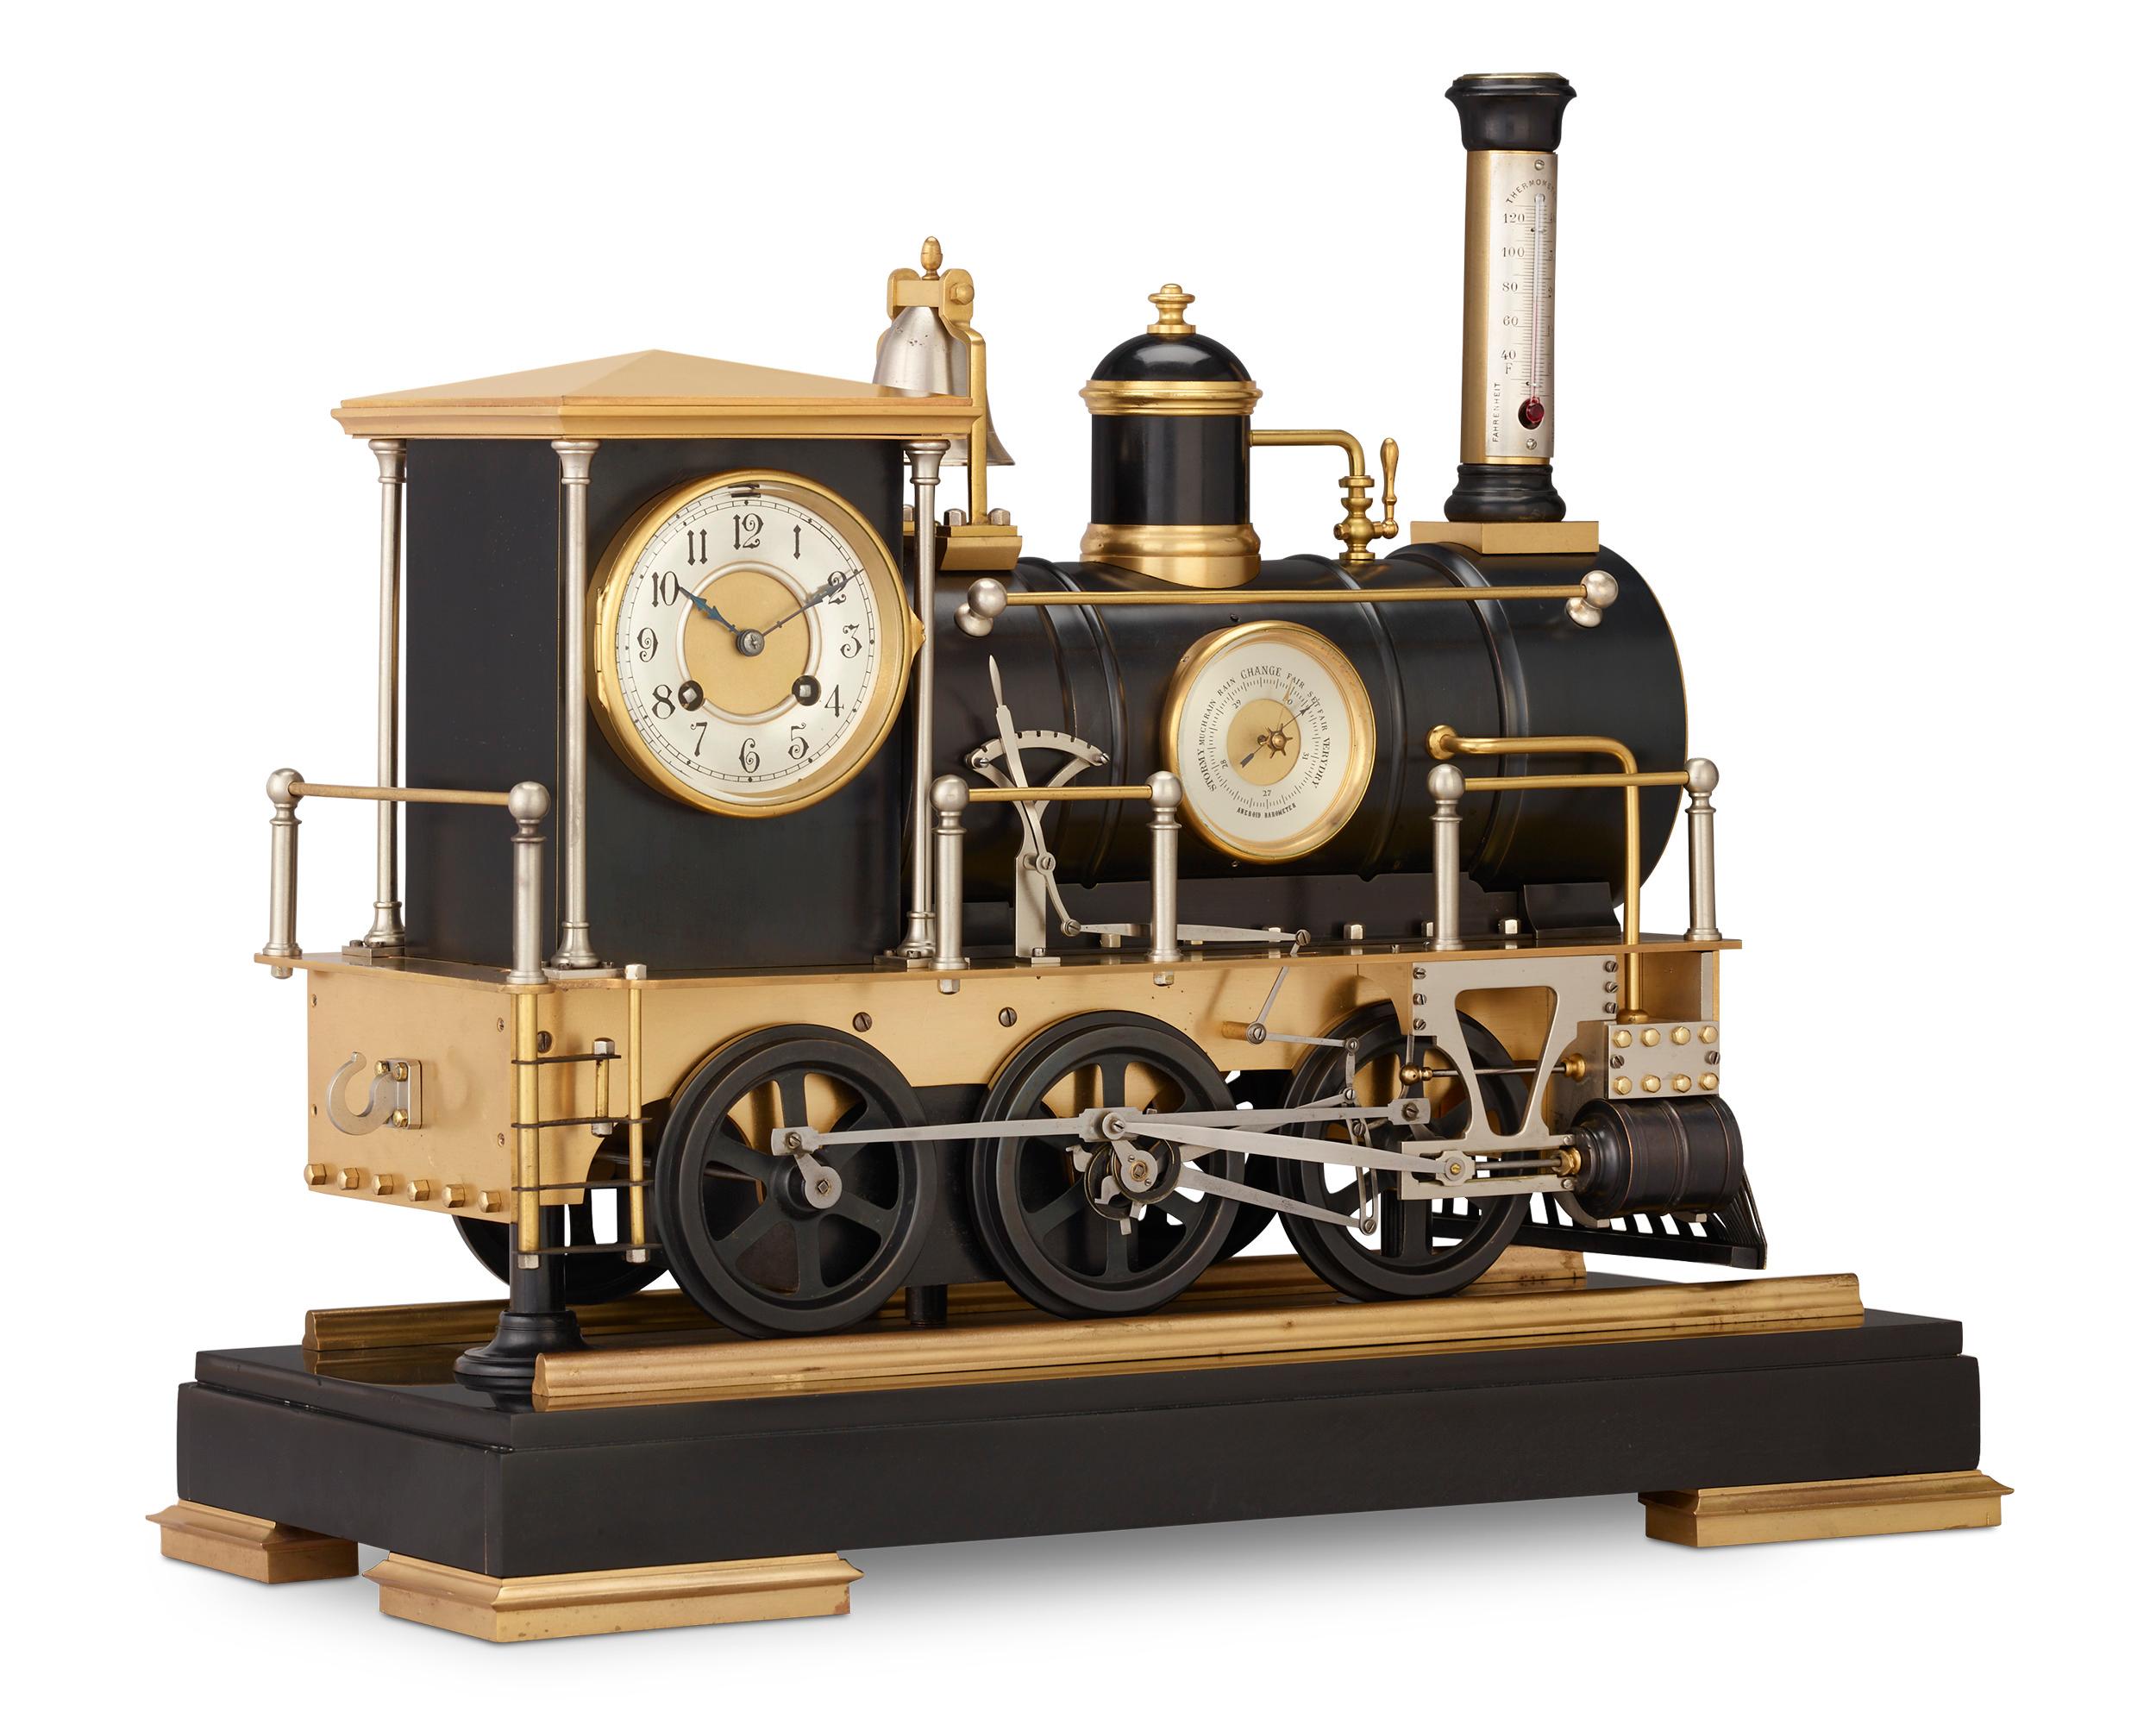 An exceptionally rare timepiece from a bygone age of industry, this automaton clock takes the form of a locomotive. The eight-day movement strikes on a gong and tells the time on a white porcelain chapter ring dial. An aneroid barometer and stick